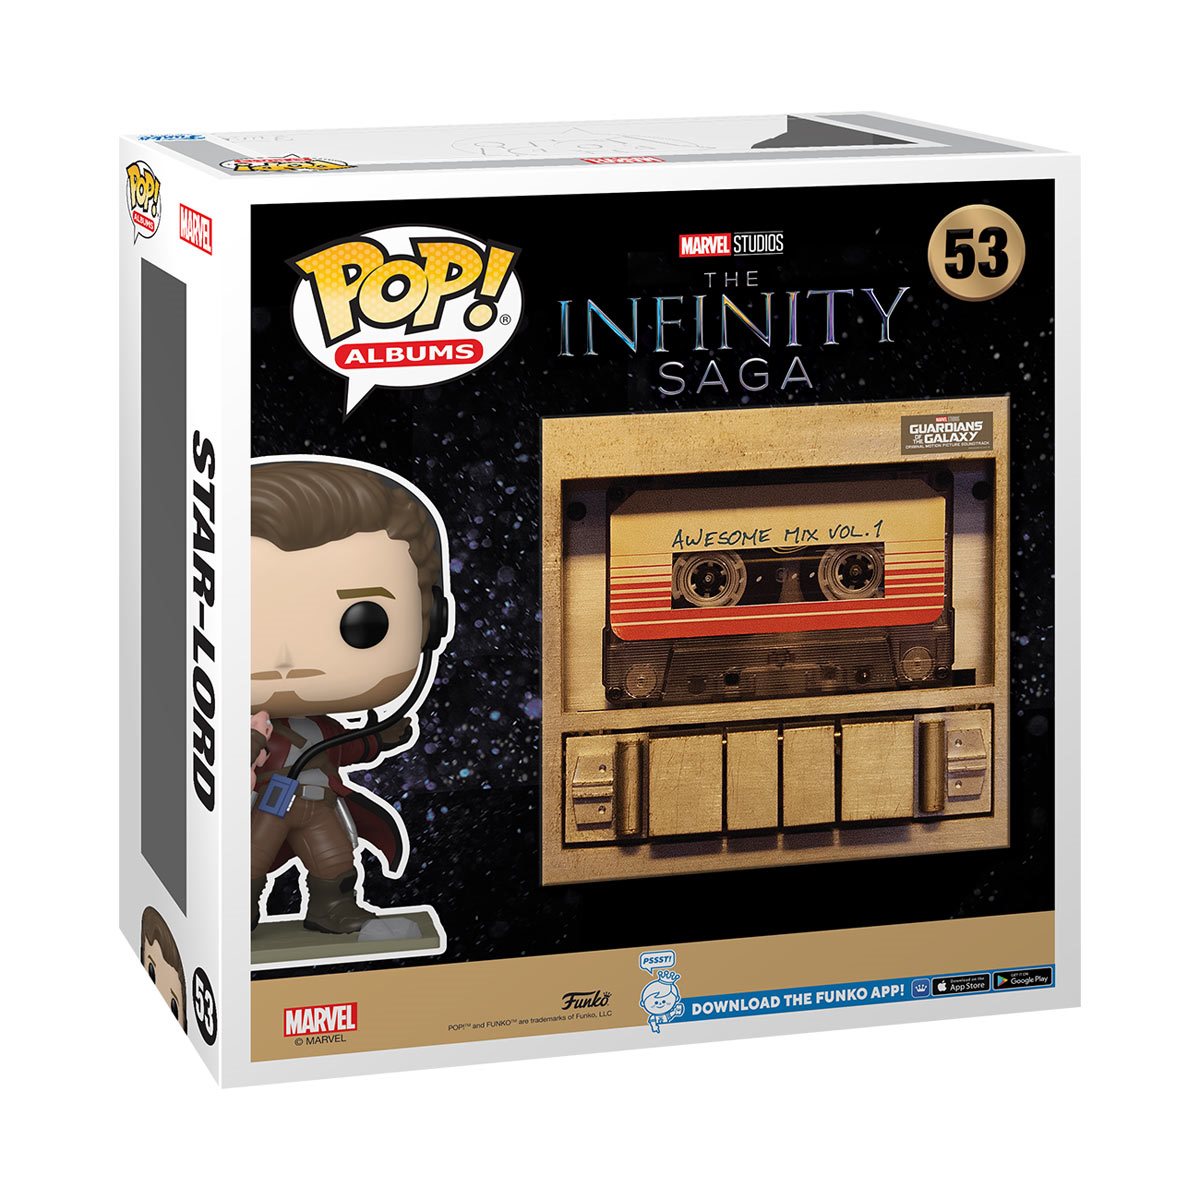 Funko Pop! Guardians Of The Galaxy – Star Lord Mixed Tape Box Lunch  Exclusive #155 - Kaboom Collectibles